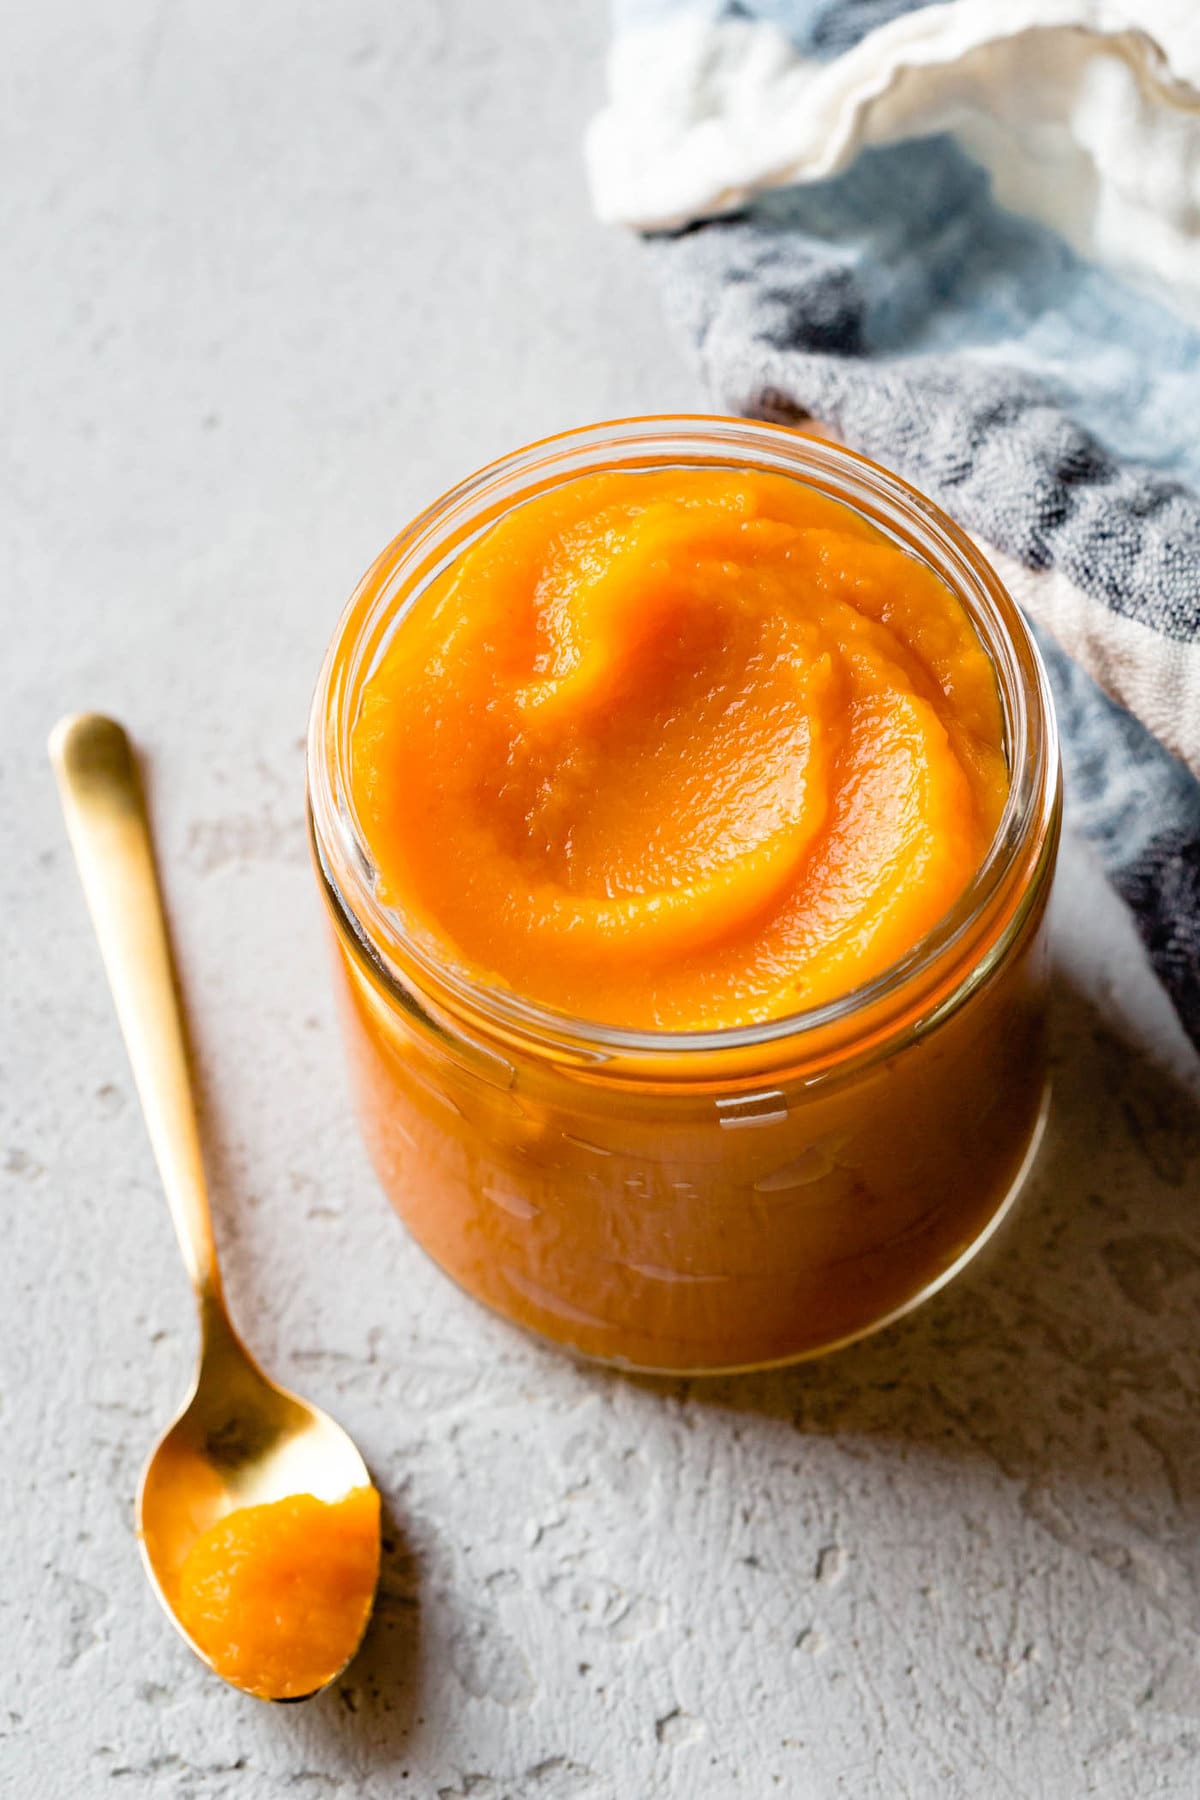 homemade "pumpkin" puree is swirled in a glass jar with a gold spoon